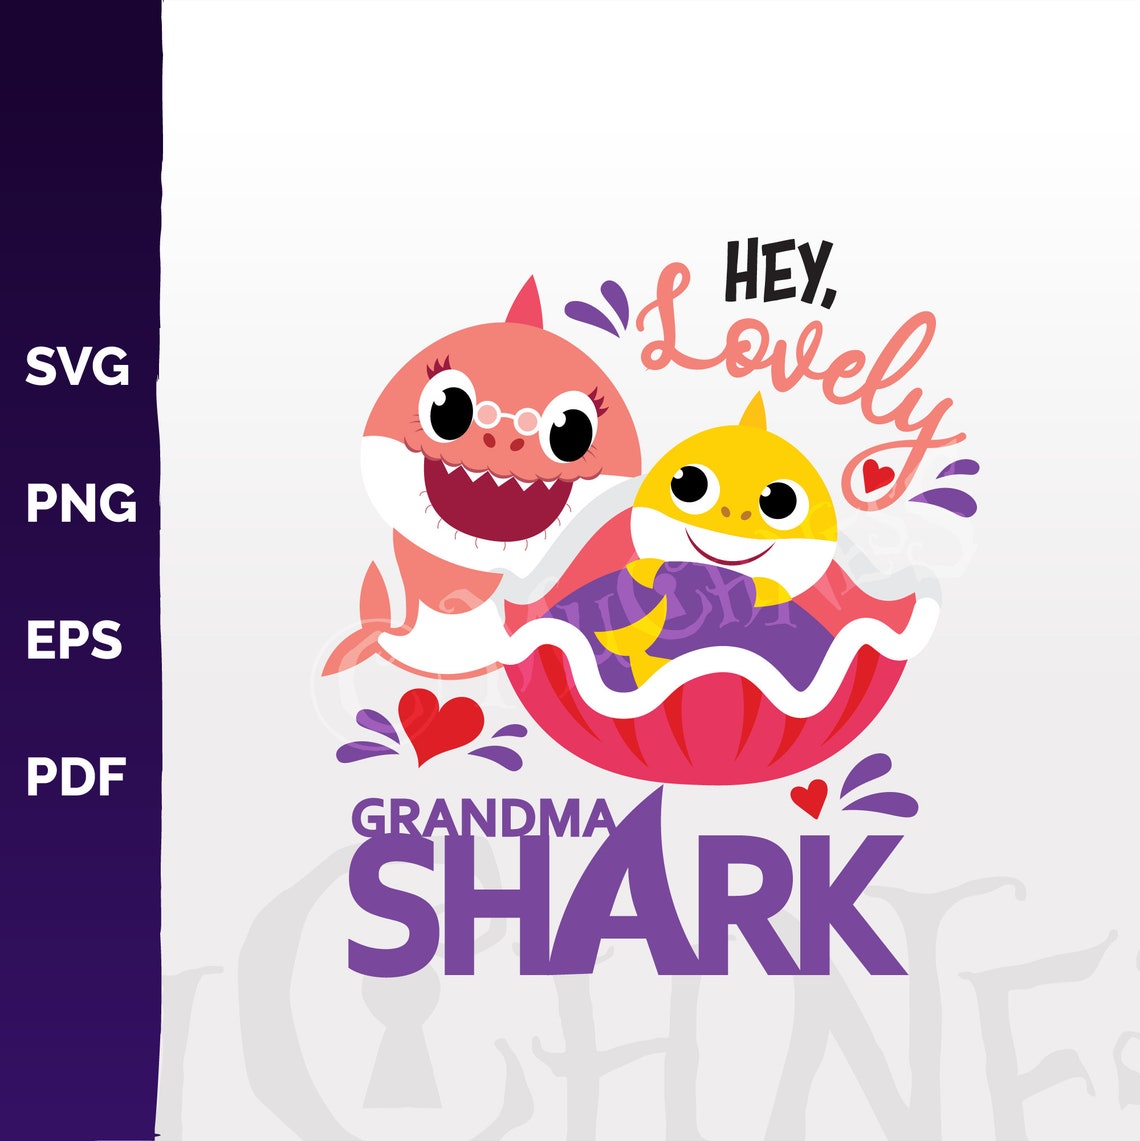 Download Hey Lovely Grandma Shark Yellow Baby svg png pdf eps | Etsy